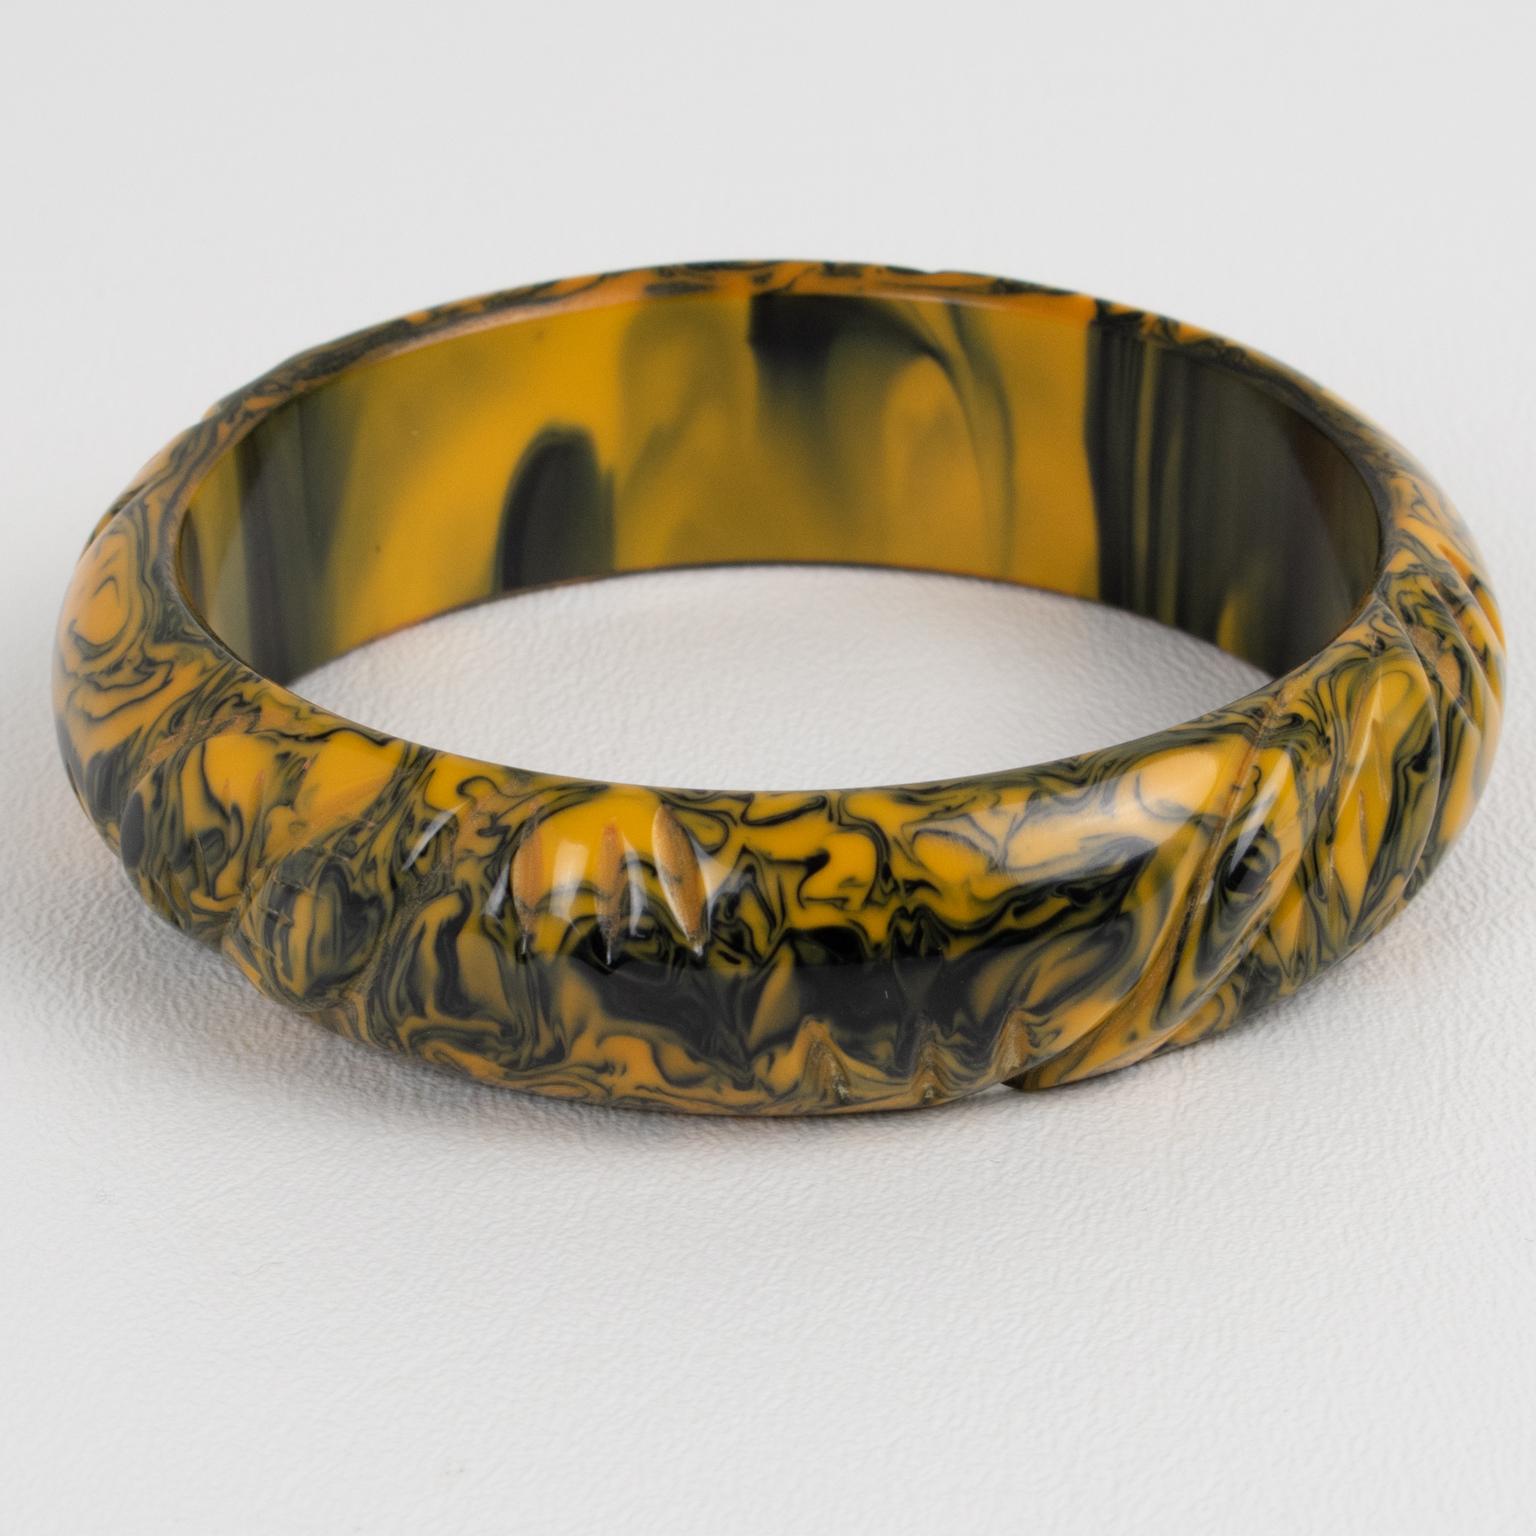 This is a lovely black and yellow butterscotch marble Bakelite carved bracelet bangle. The piece features a chunky domed shape with deep geometric carving all around. The color is an intense yellow butterscotch marble tone with black cloudy